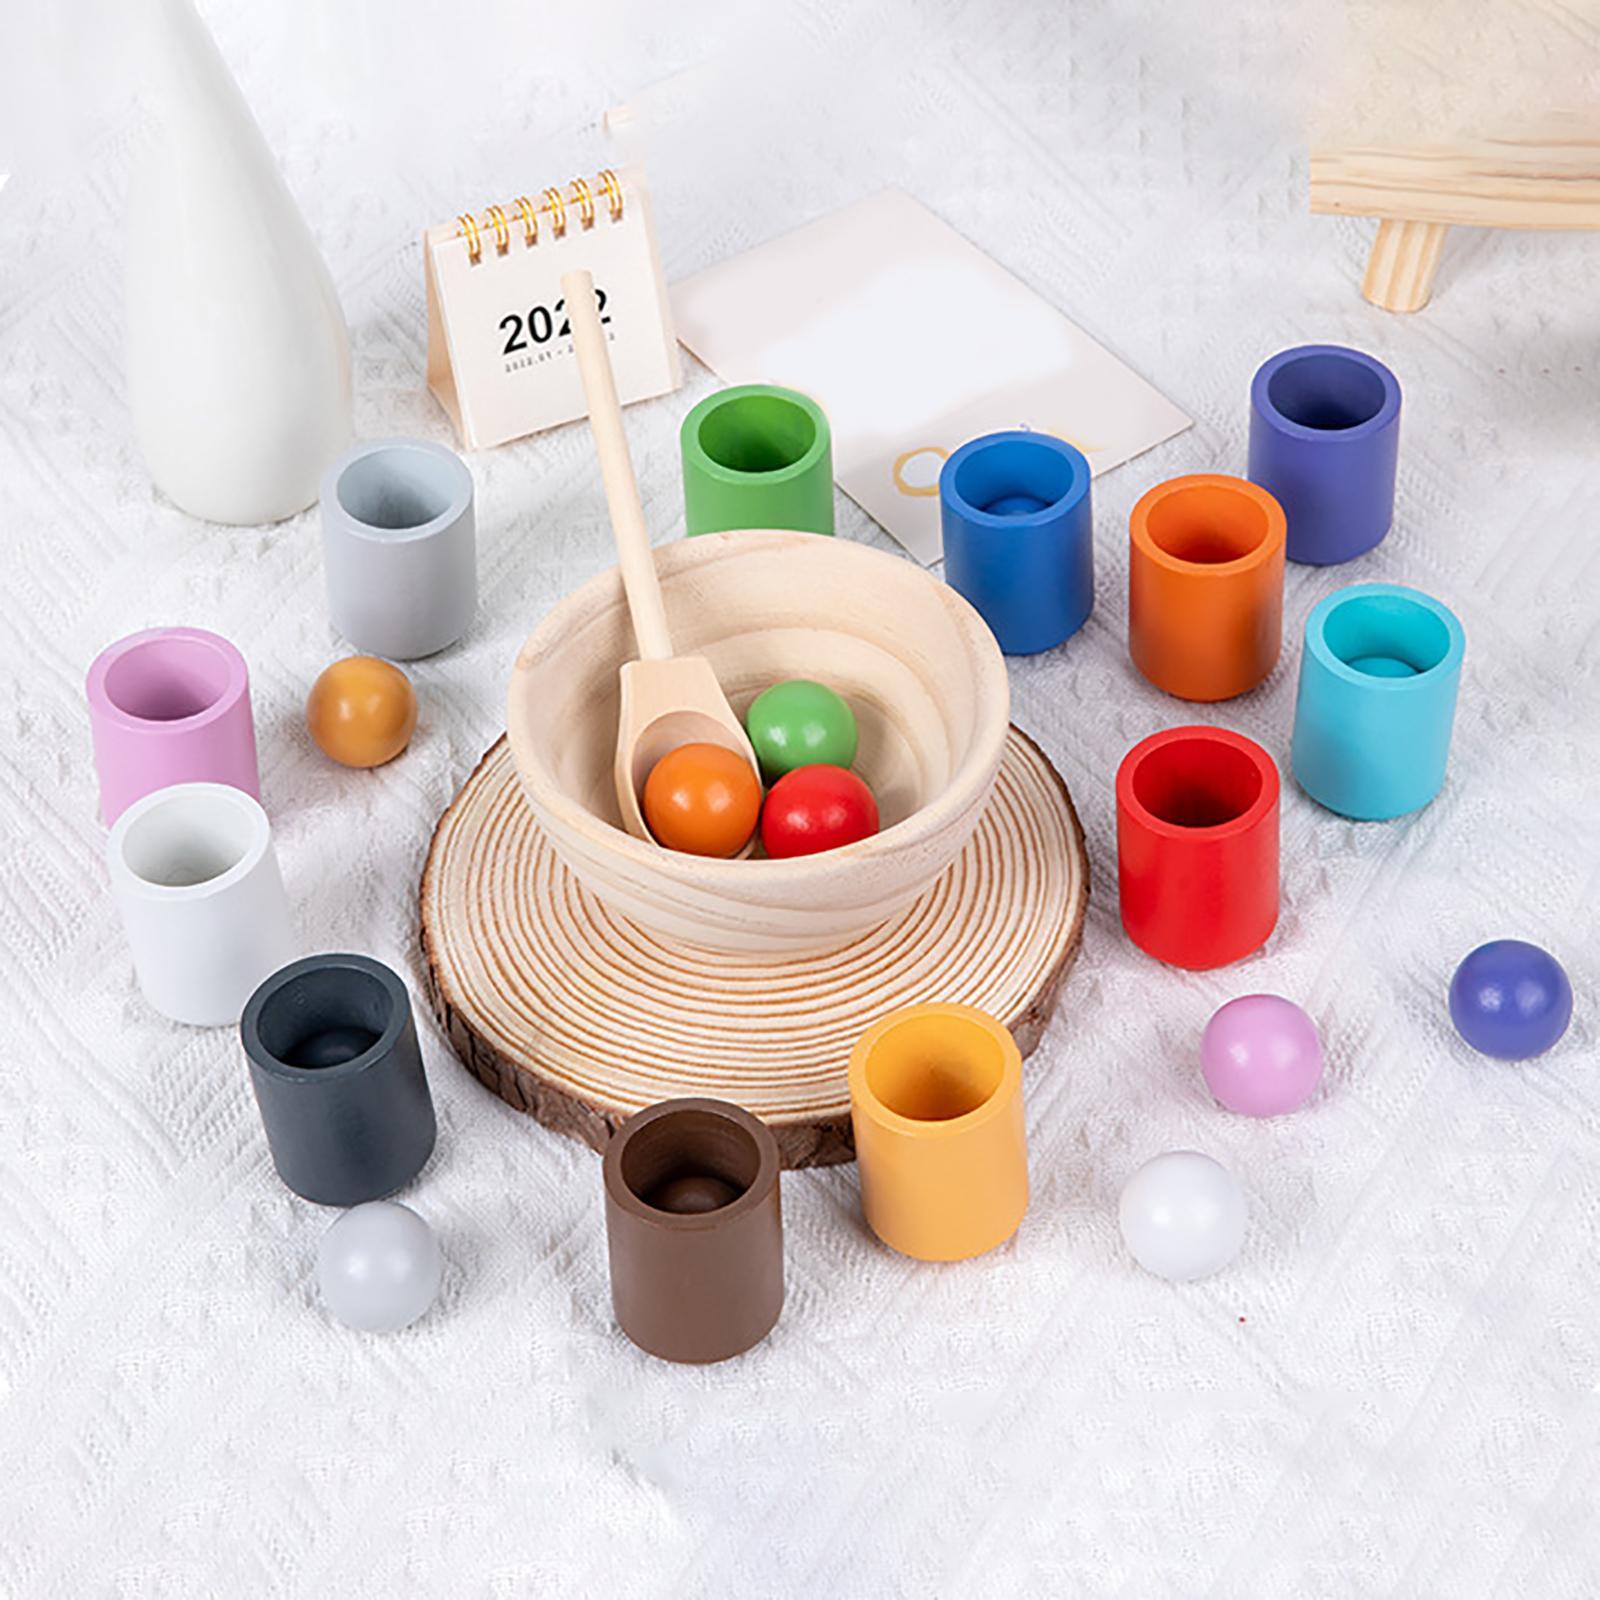 Sensorial Material Toy - Wooden Gradient Color Matching